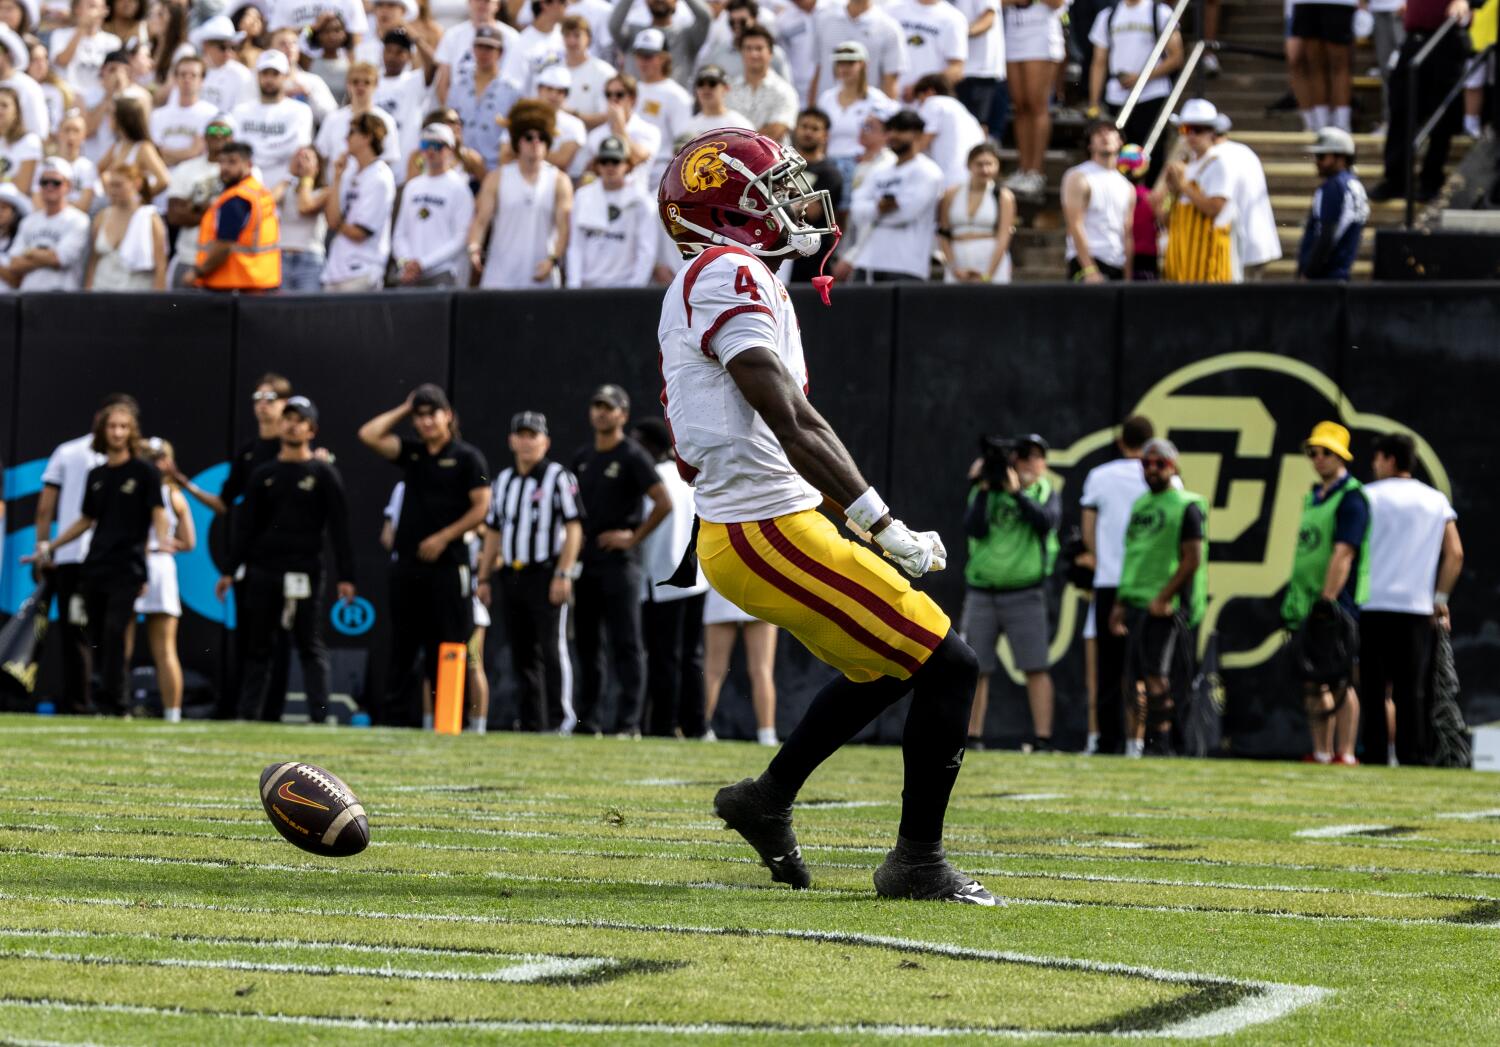 USC survives the Deion Sanders show in narrow win over Colorado